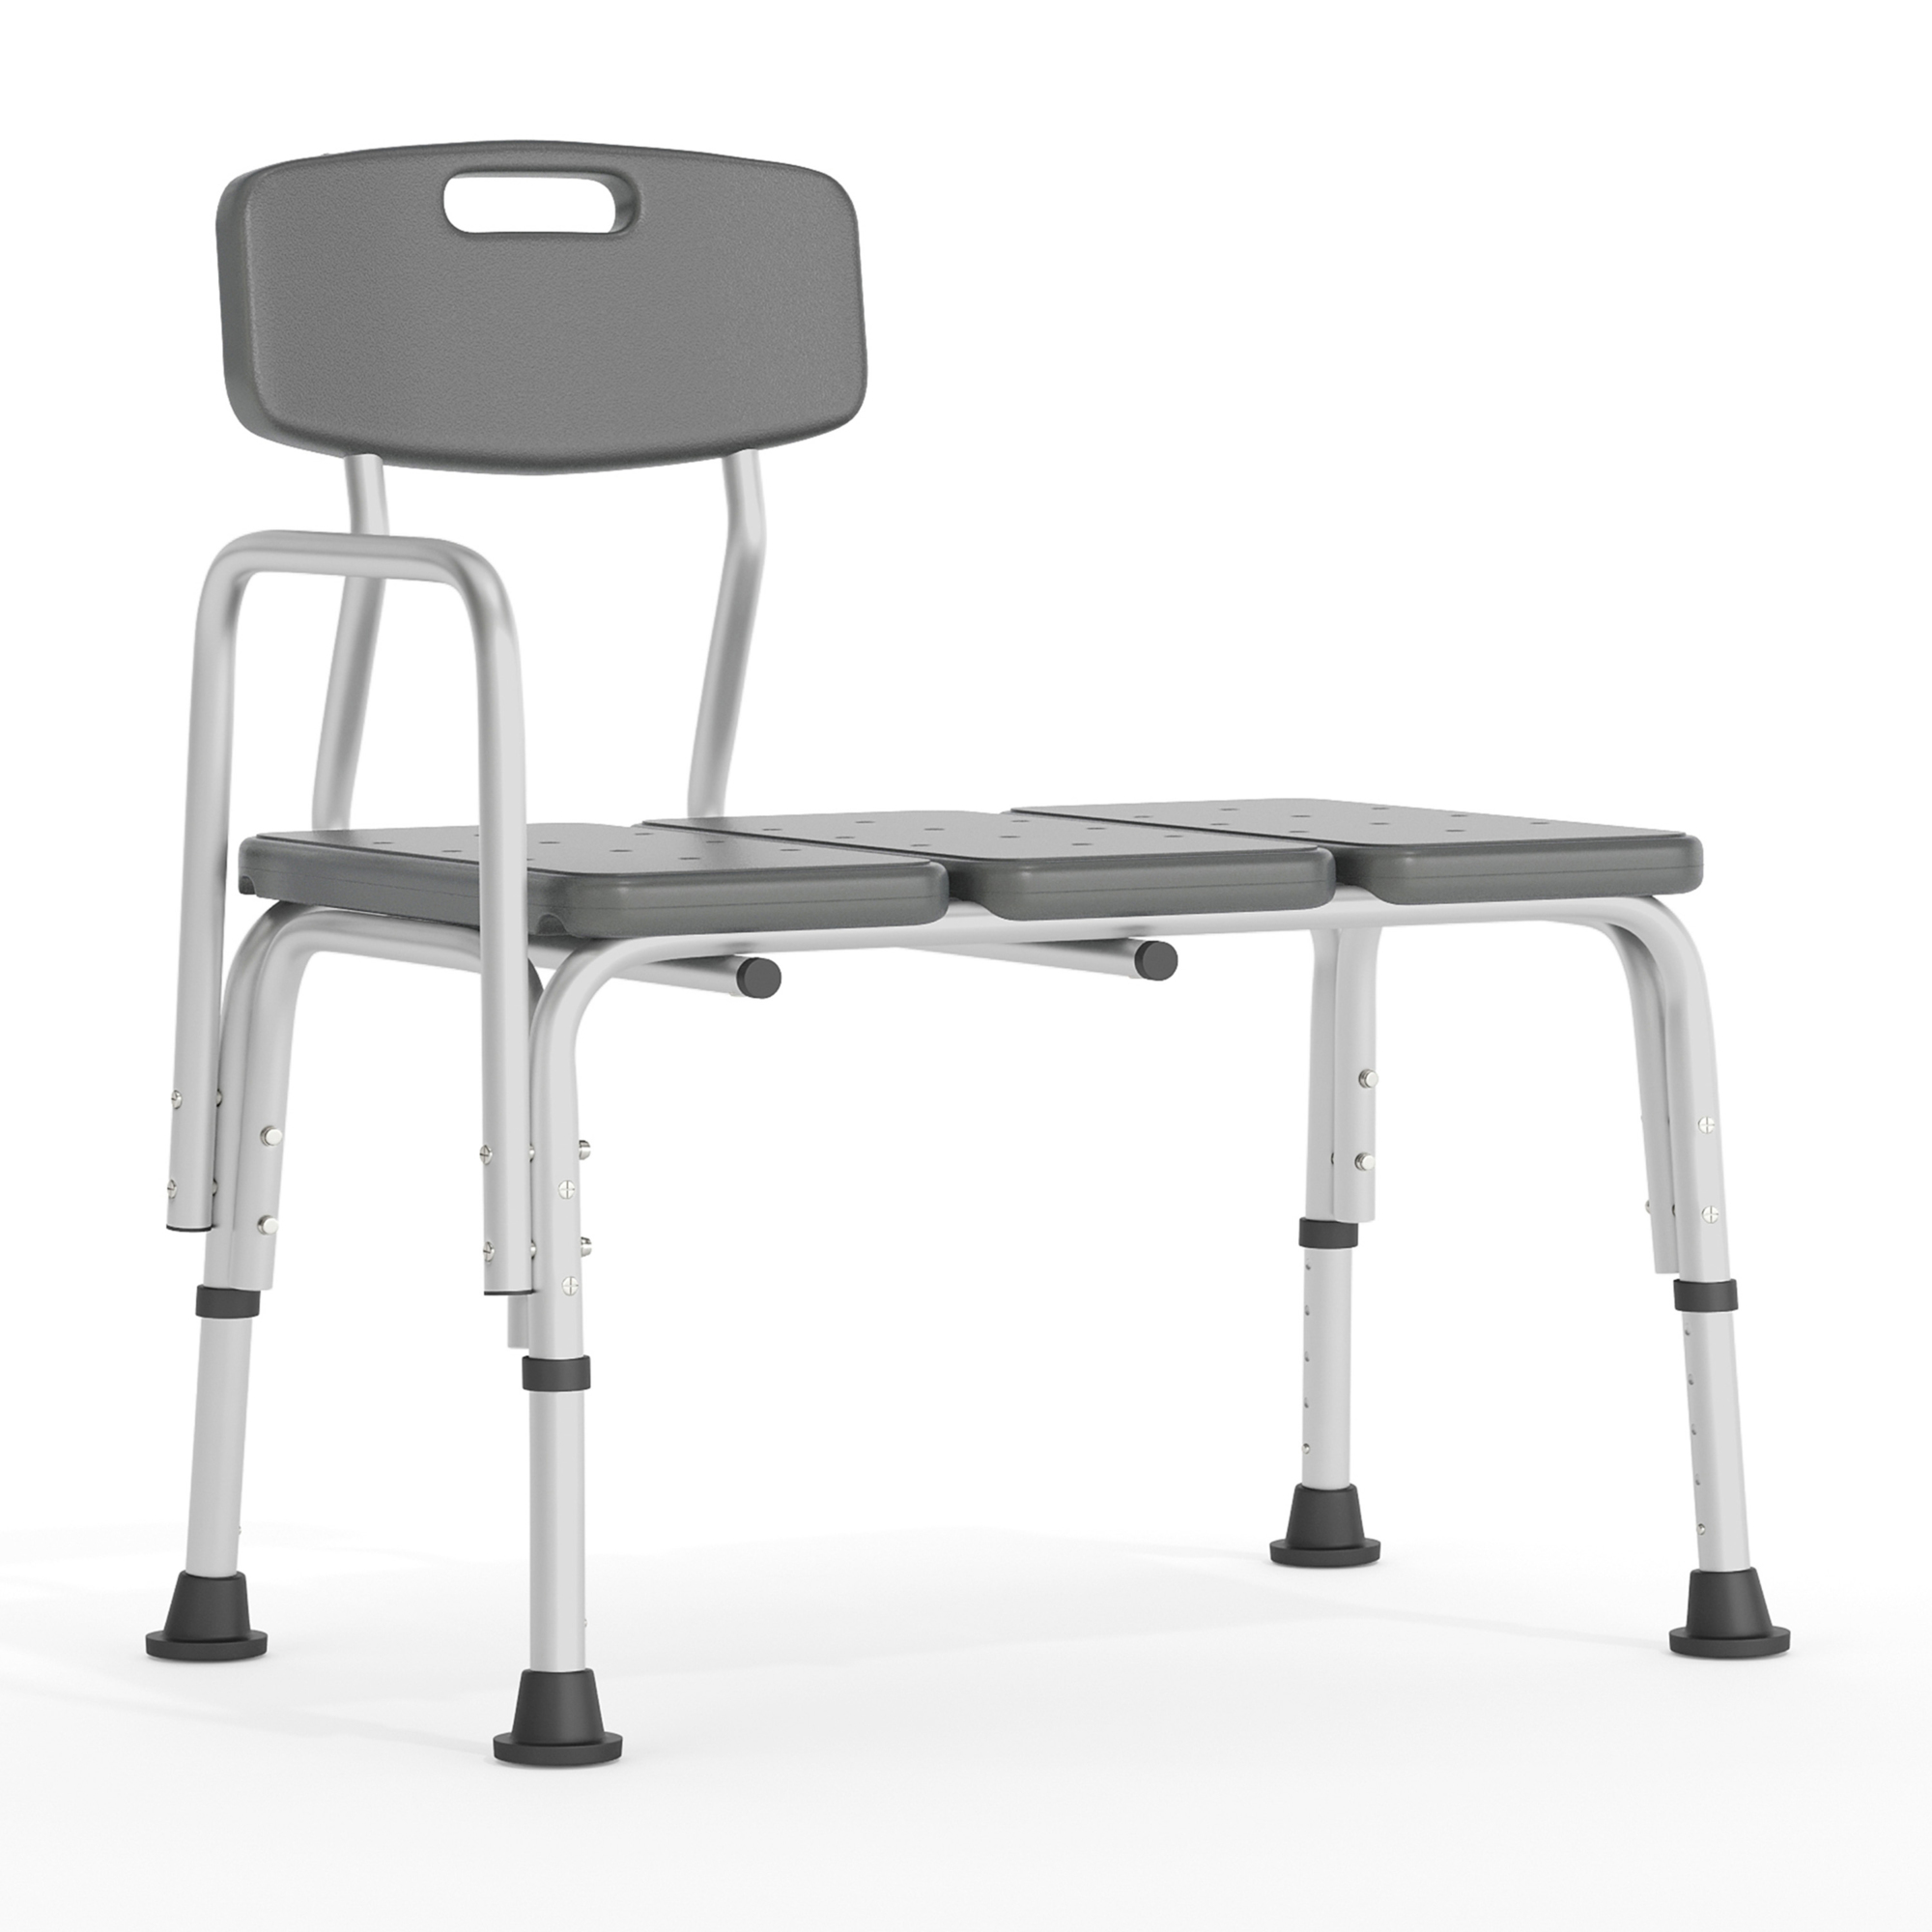 Flash Furniture, Gray Bath Shower Medical Transfer Bench, Includes (qty.) 1 Model DCHY3510LGRY